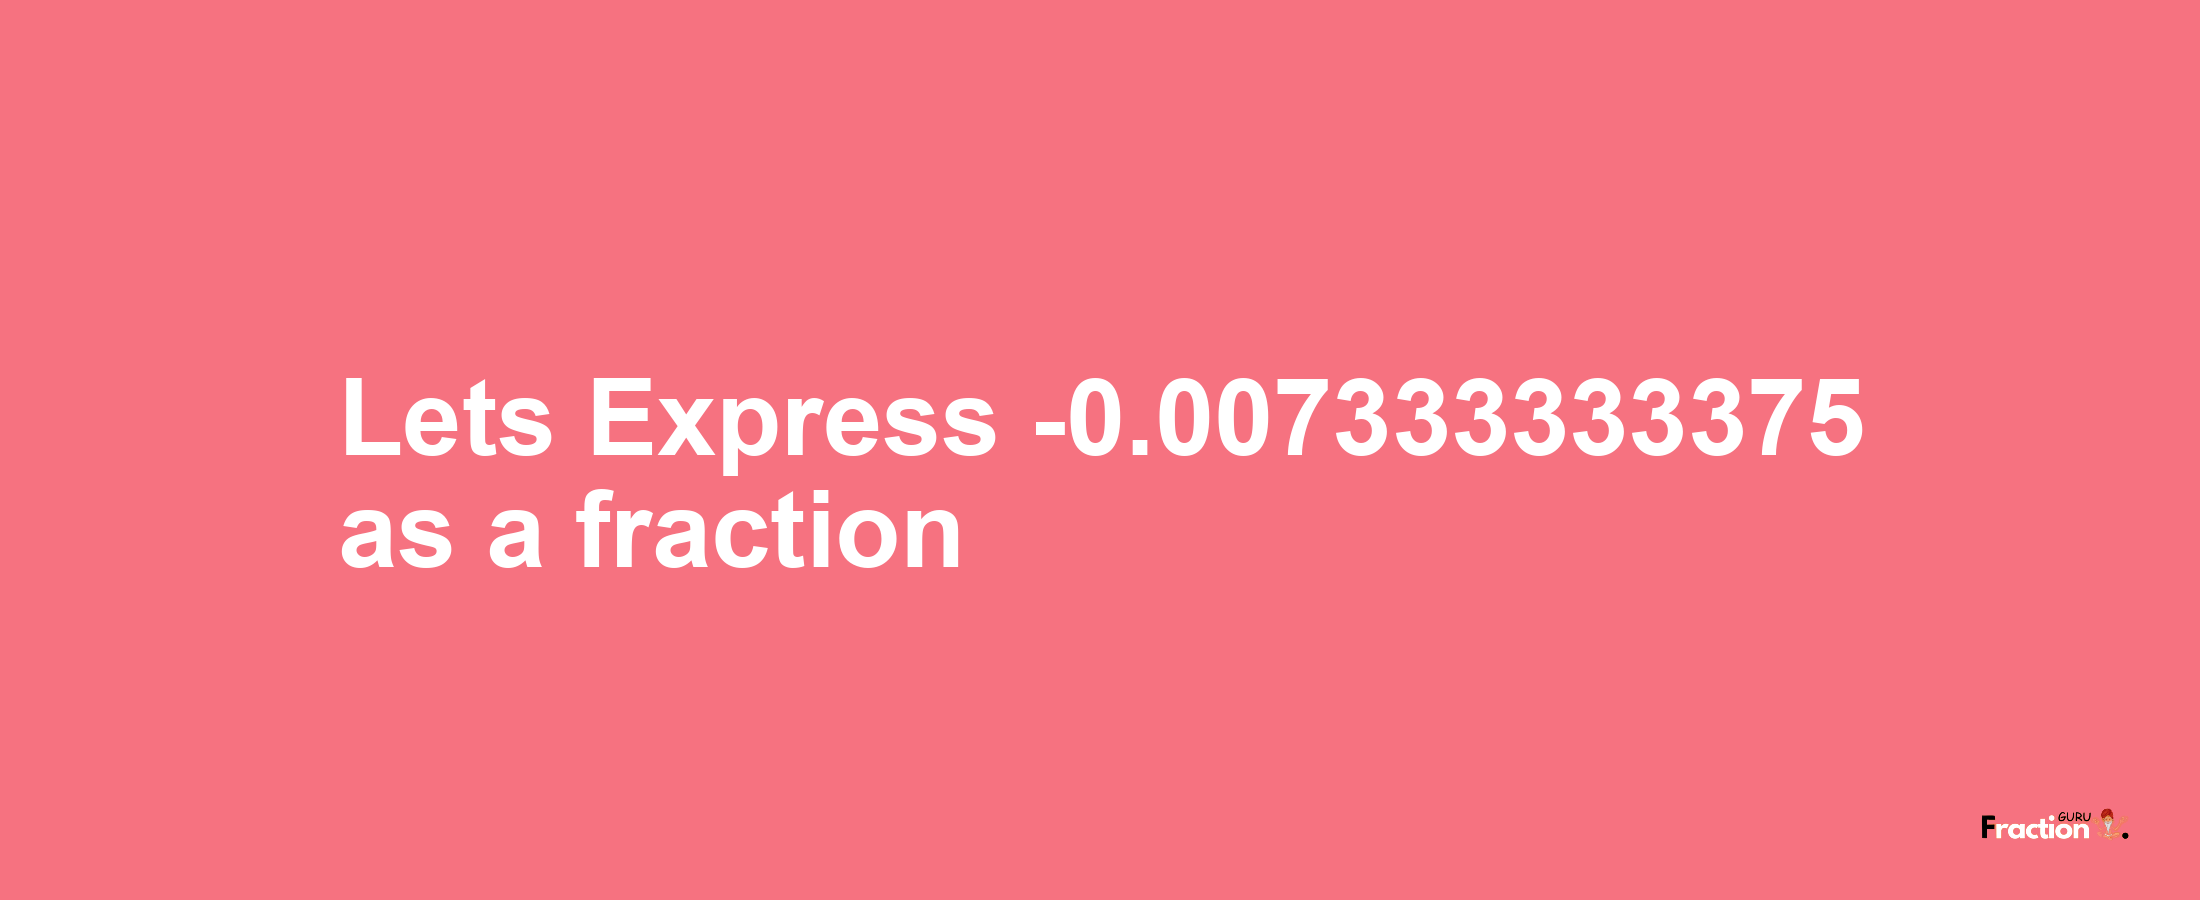 Lets Express -0.007333333375 as afraction